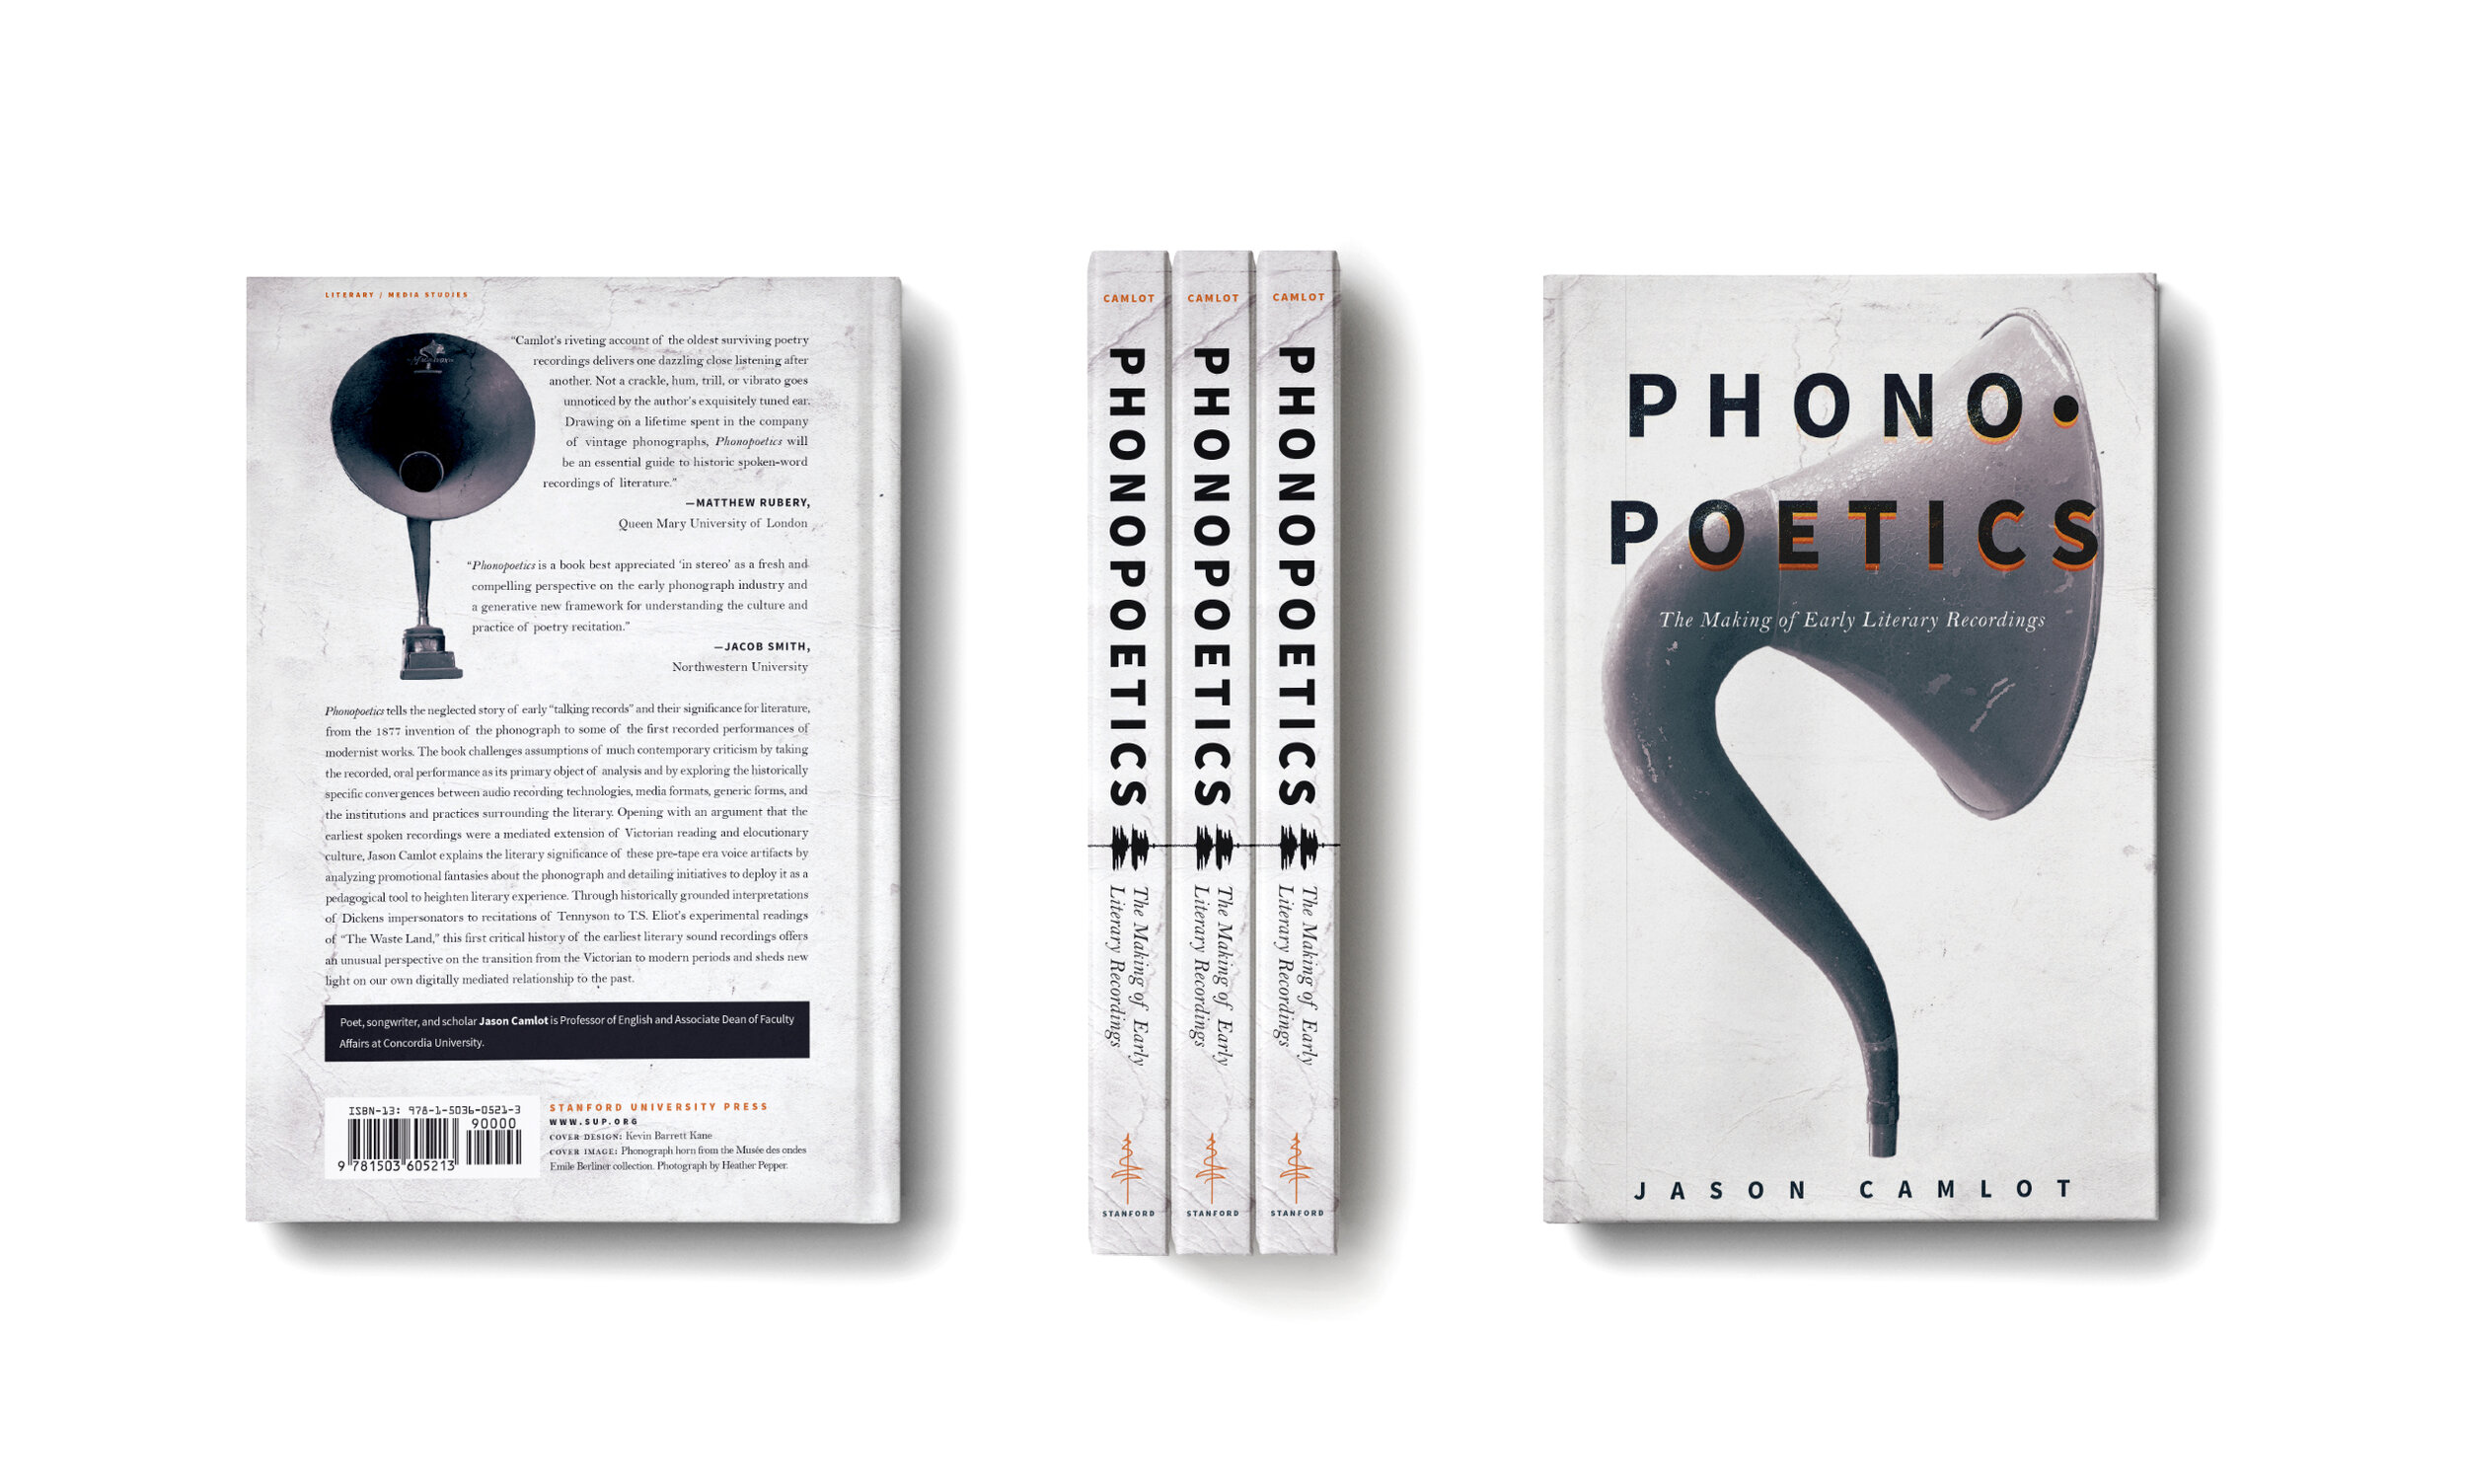 Phonopoetics, by Jason Camlot (Stanford, 2019)